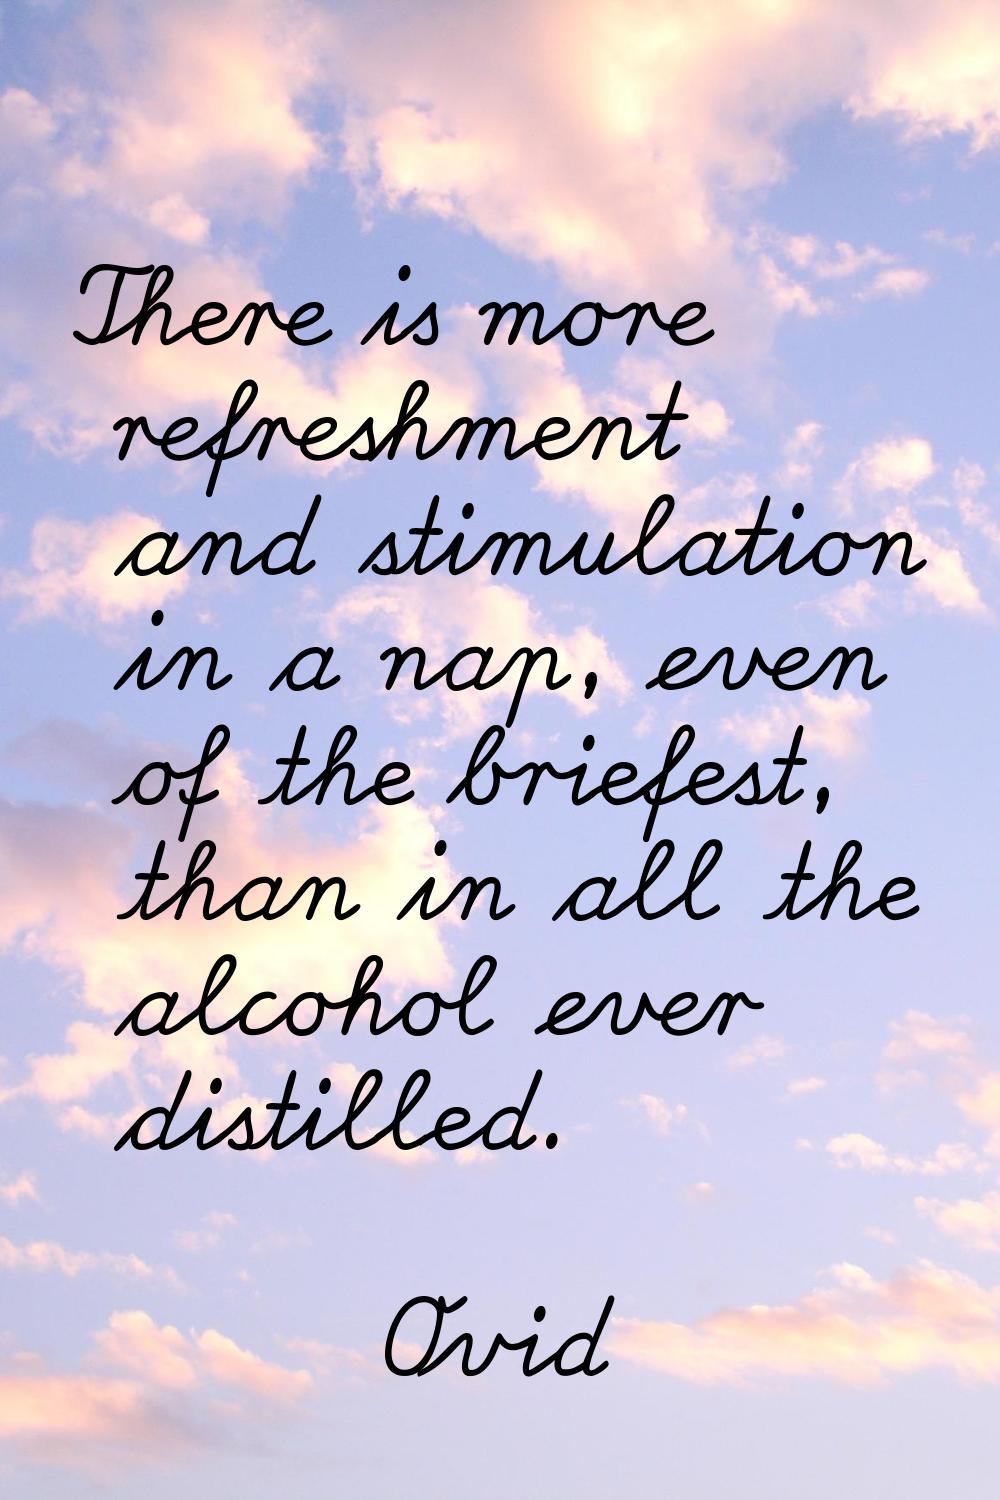 There is more refreshment and stimulation in a nap, even of the briefest, than in all the alcohol e